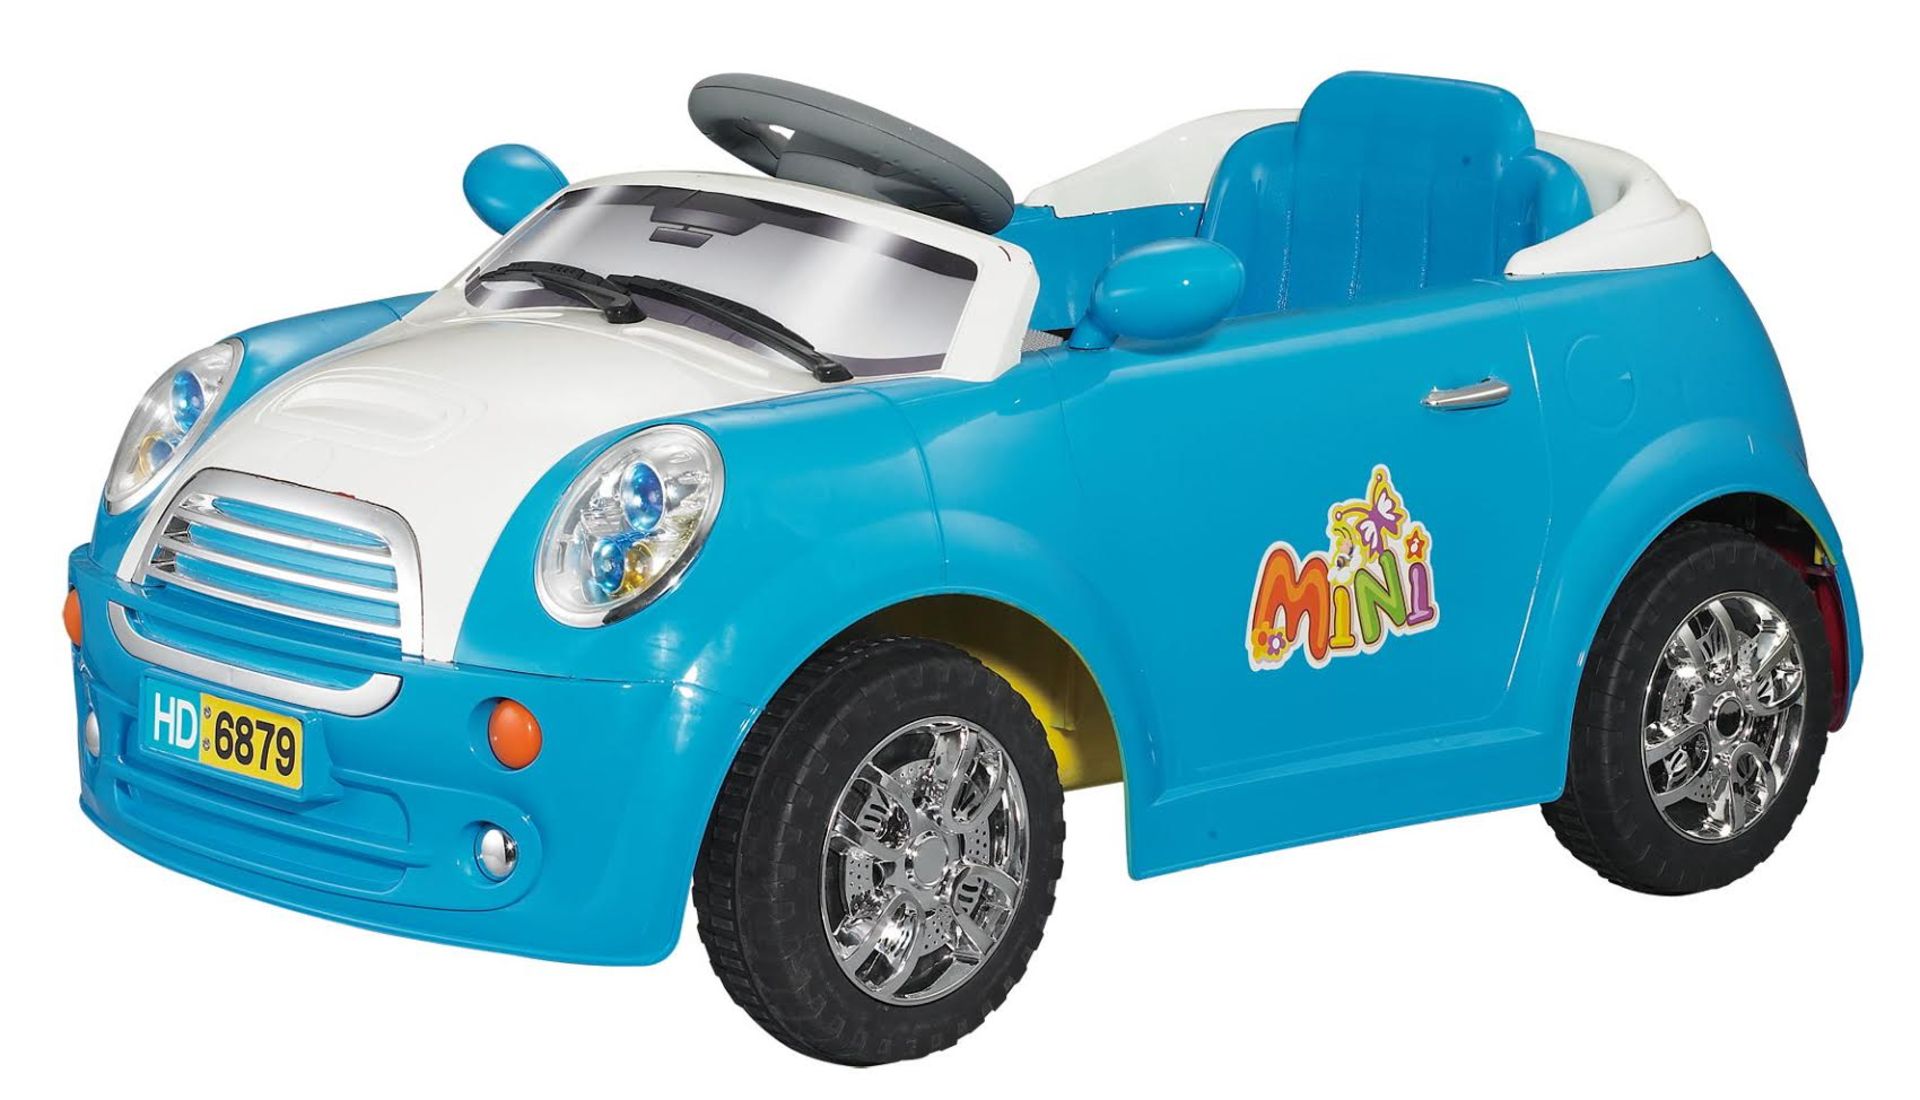 V Brand New Mini Car 6v Childrens Ride on Car - Blue X 2 YOUR BID PRICE TO BE MULTIPLIED BY TWO